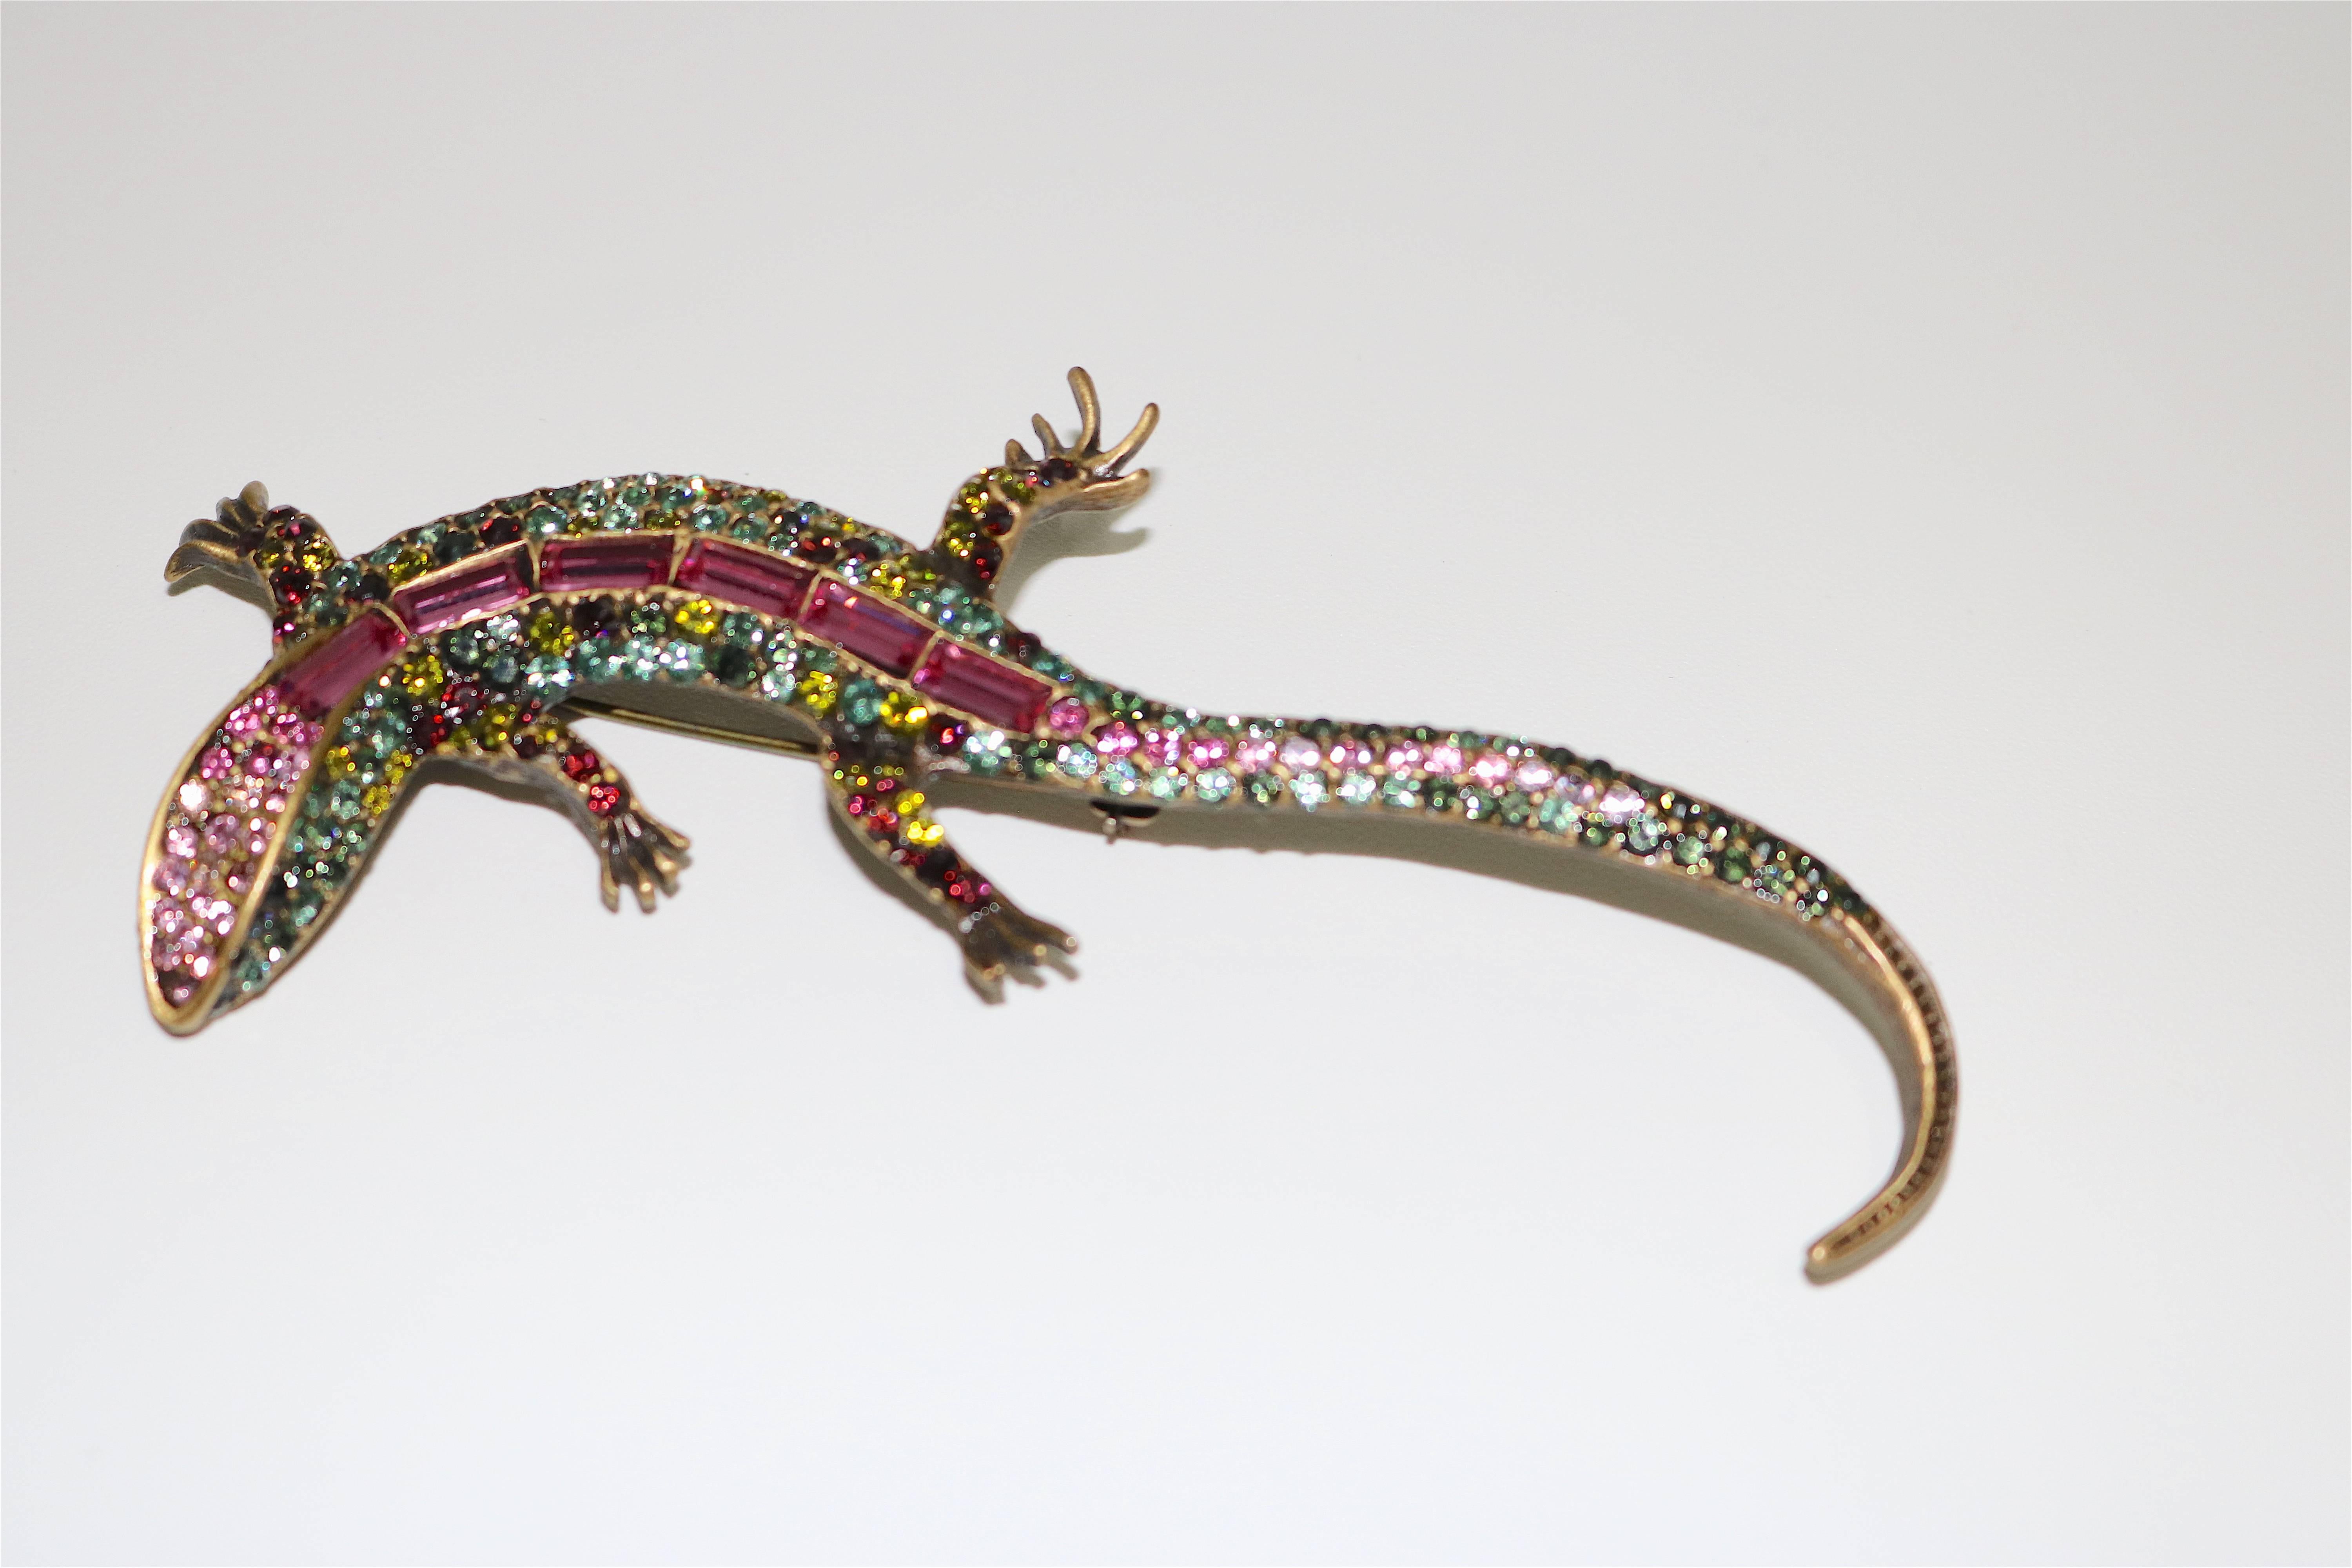 This beautiful Jay Strongwater salamander brooch has a gold toned base set with green, yellow, ruby and pink Swarovski® crystals including the top of it’s back is inlaid with large emerald cut pink crystals. It makes a gorgeous statement. The pin